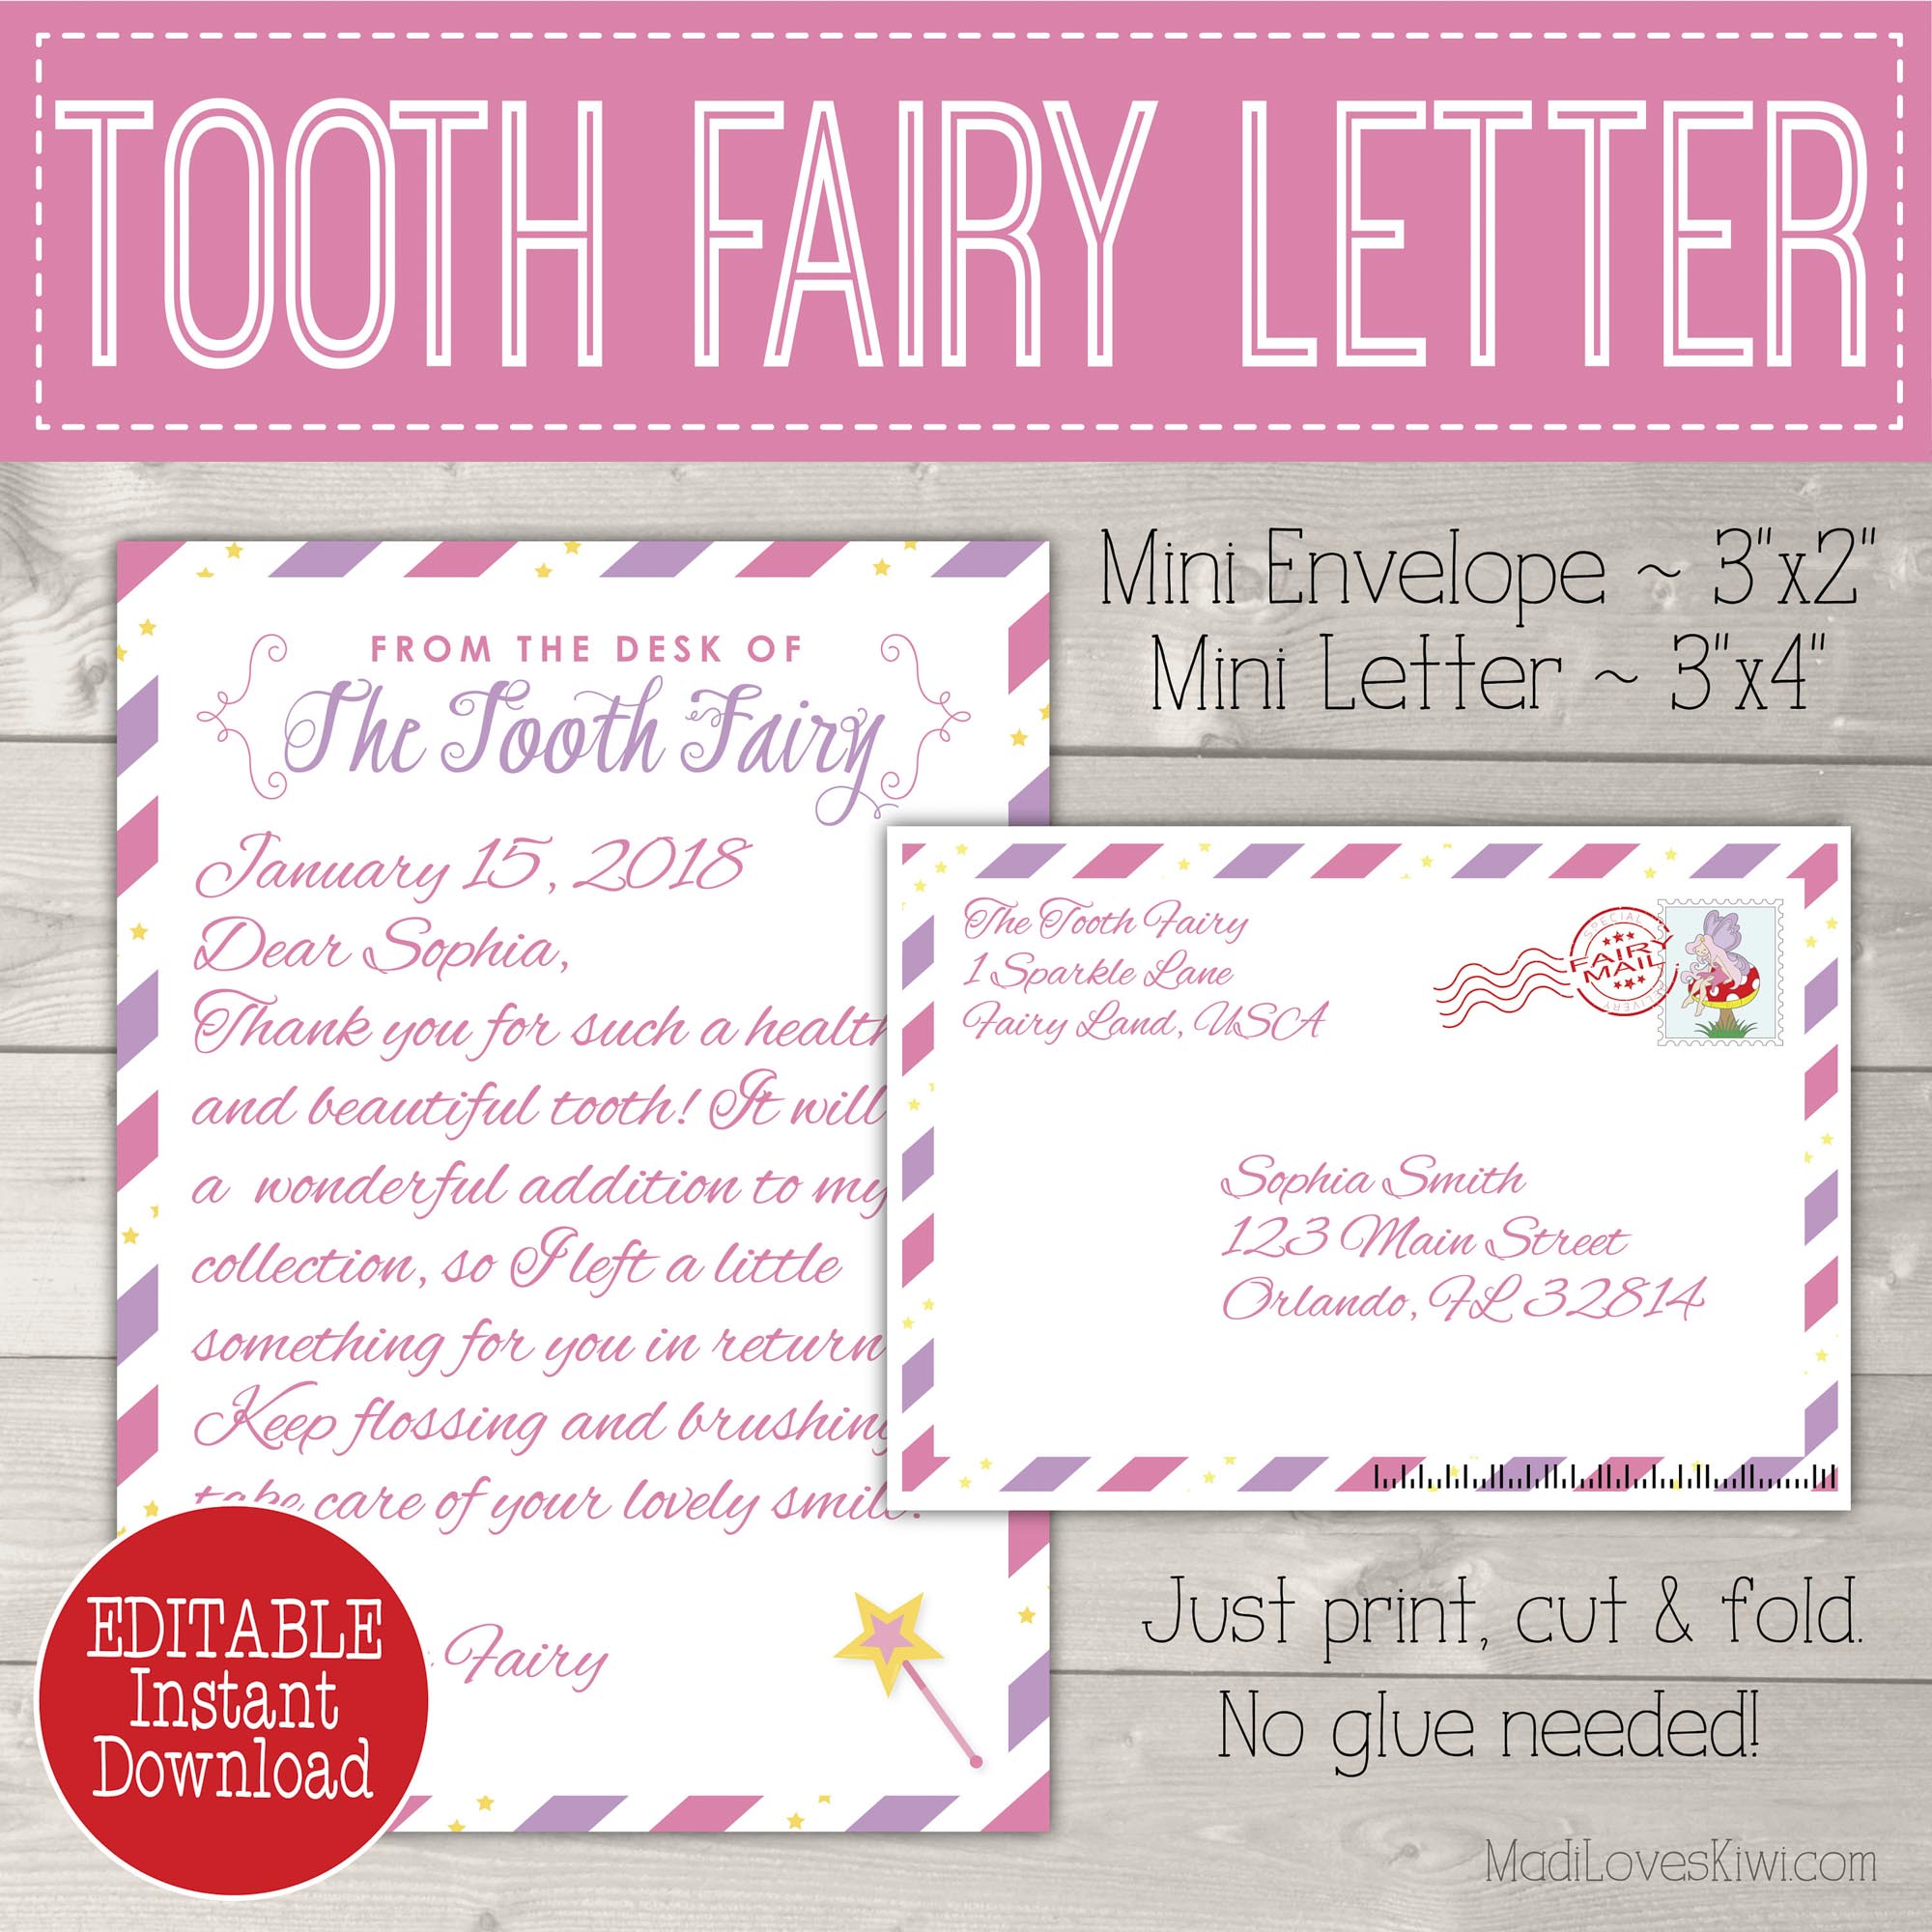 free-printable-tooth-fairy-letter-template-bopqeproduction